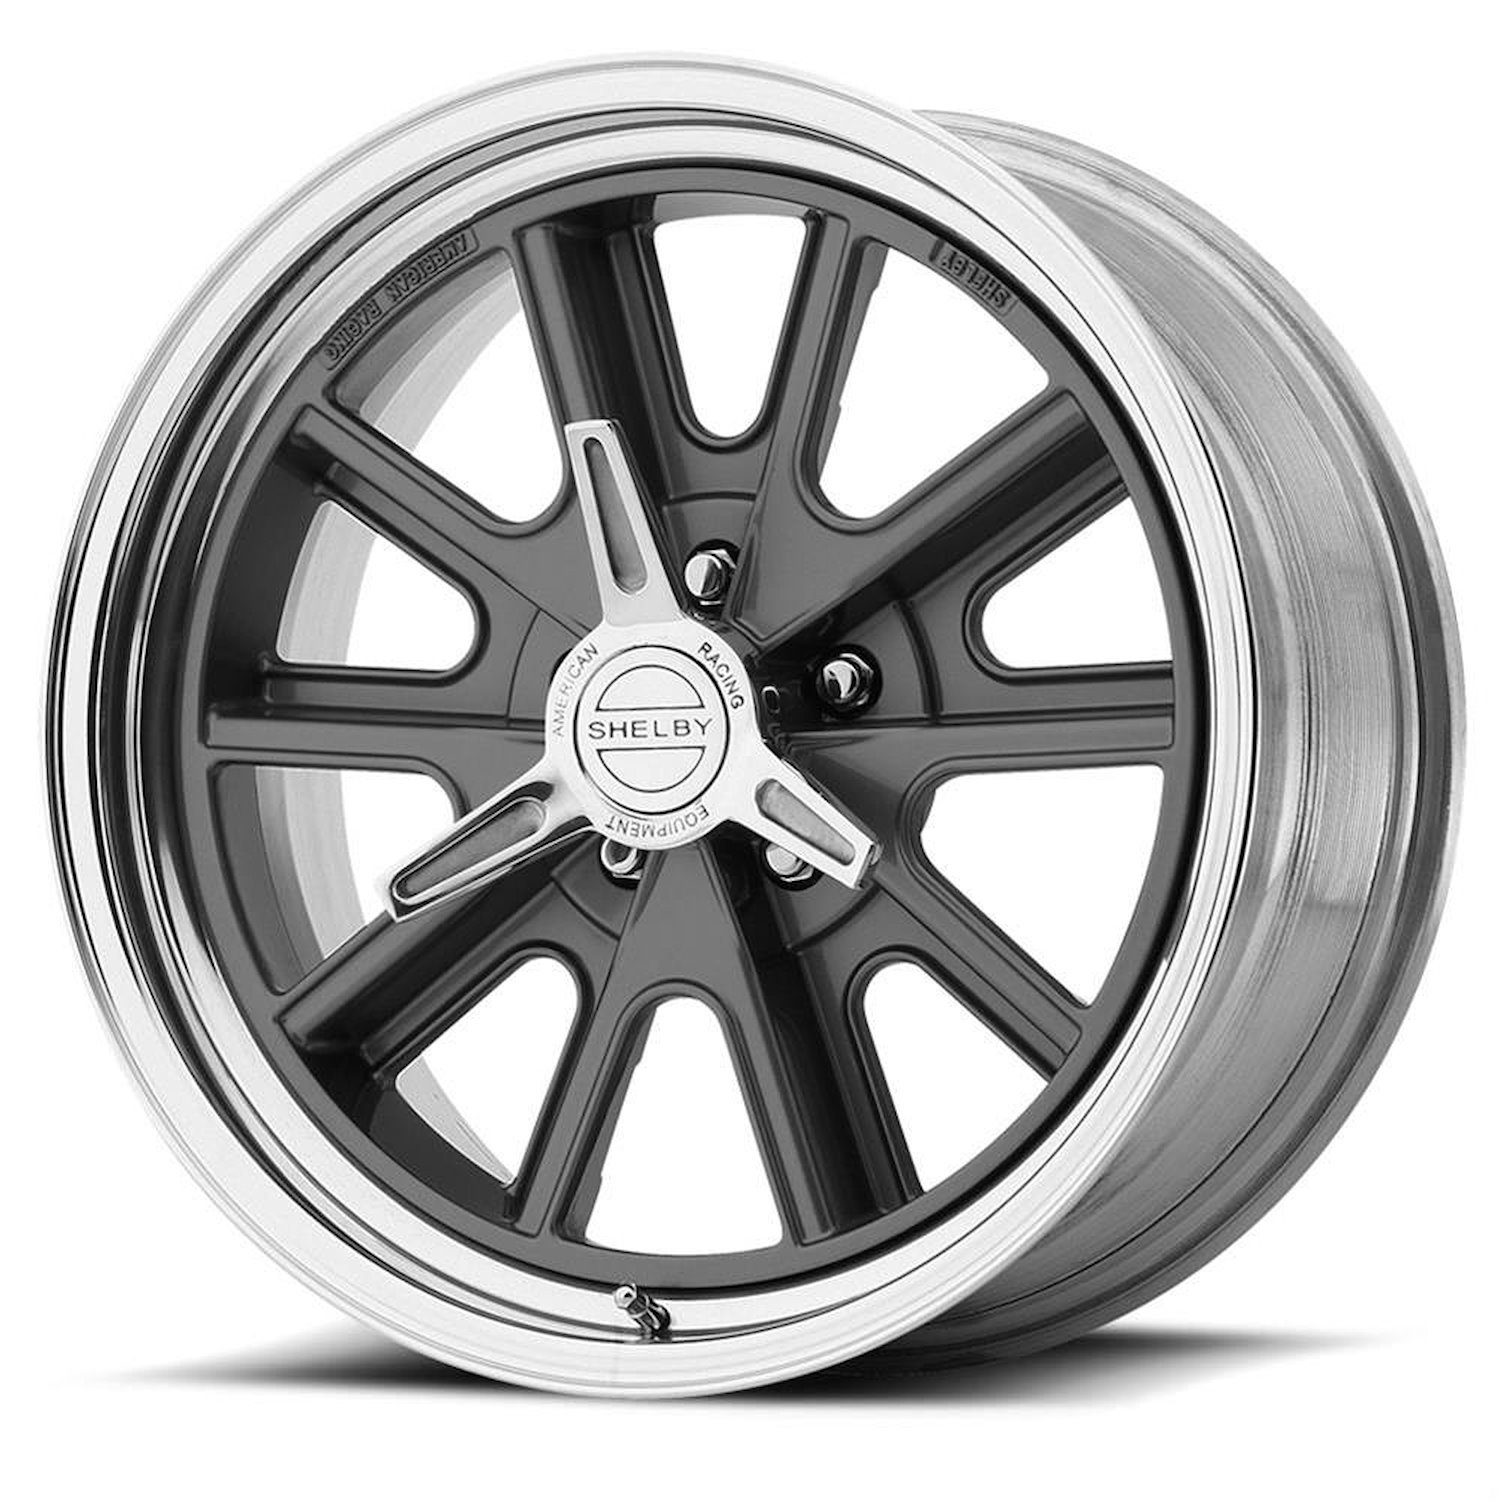 AMERICAN RACING 427 SHELBY COBRA TWO-PIECE MAG GRAY CENTER POLISHED BARREL 17 x 9.5 5x4.5 19 6.00